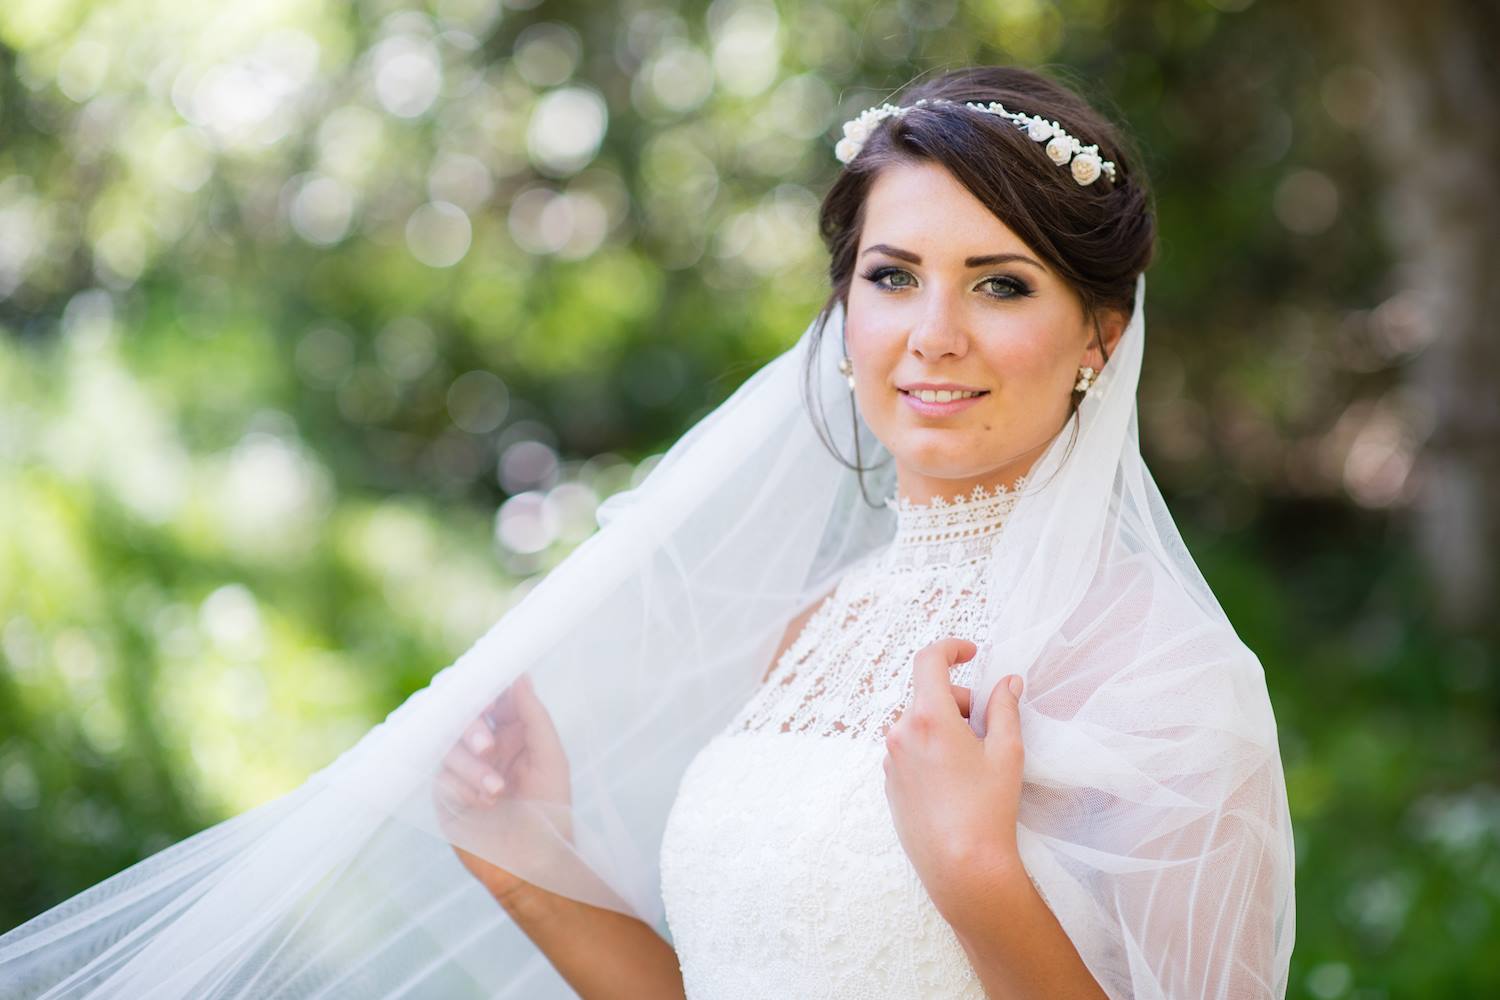 One of Adelaide's most exquisite wedding dress designers - Adelady